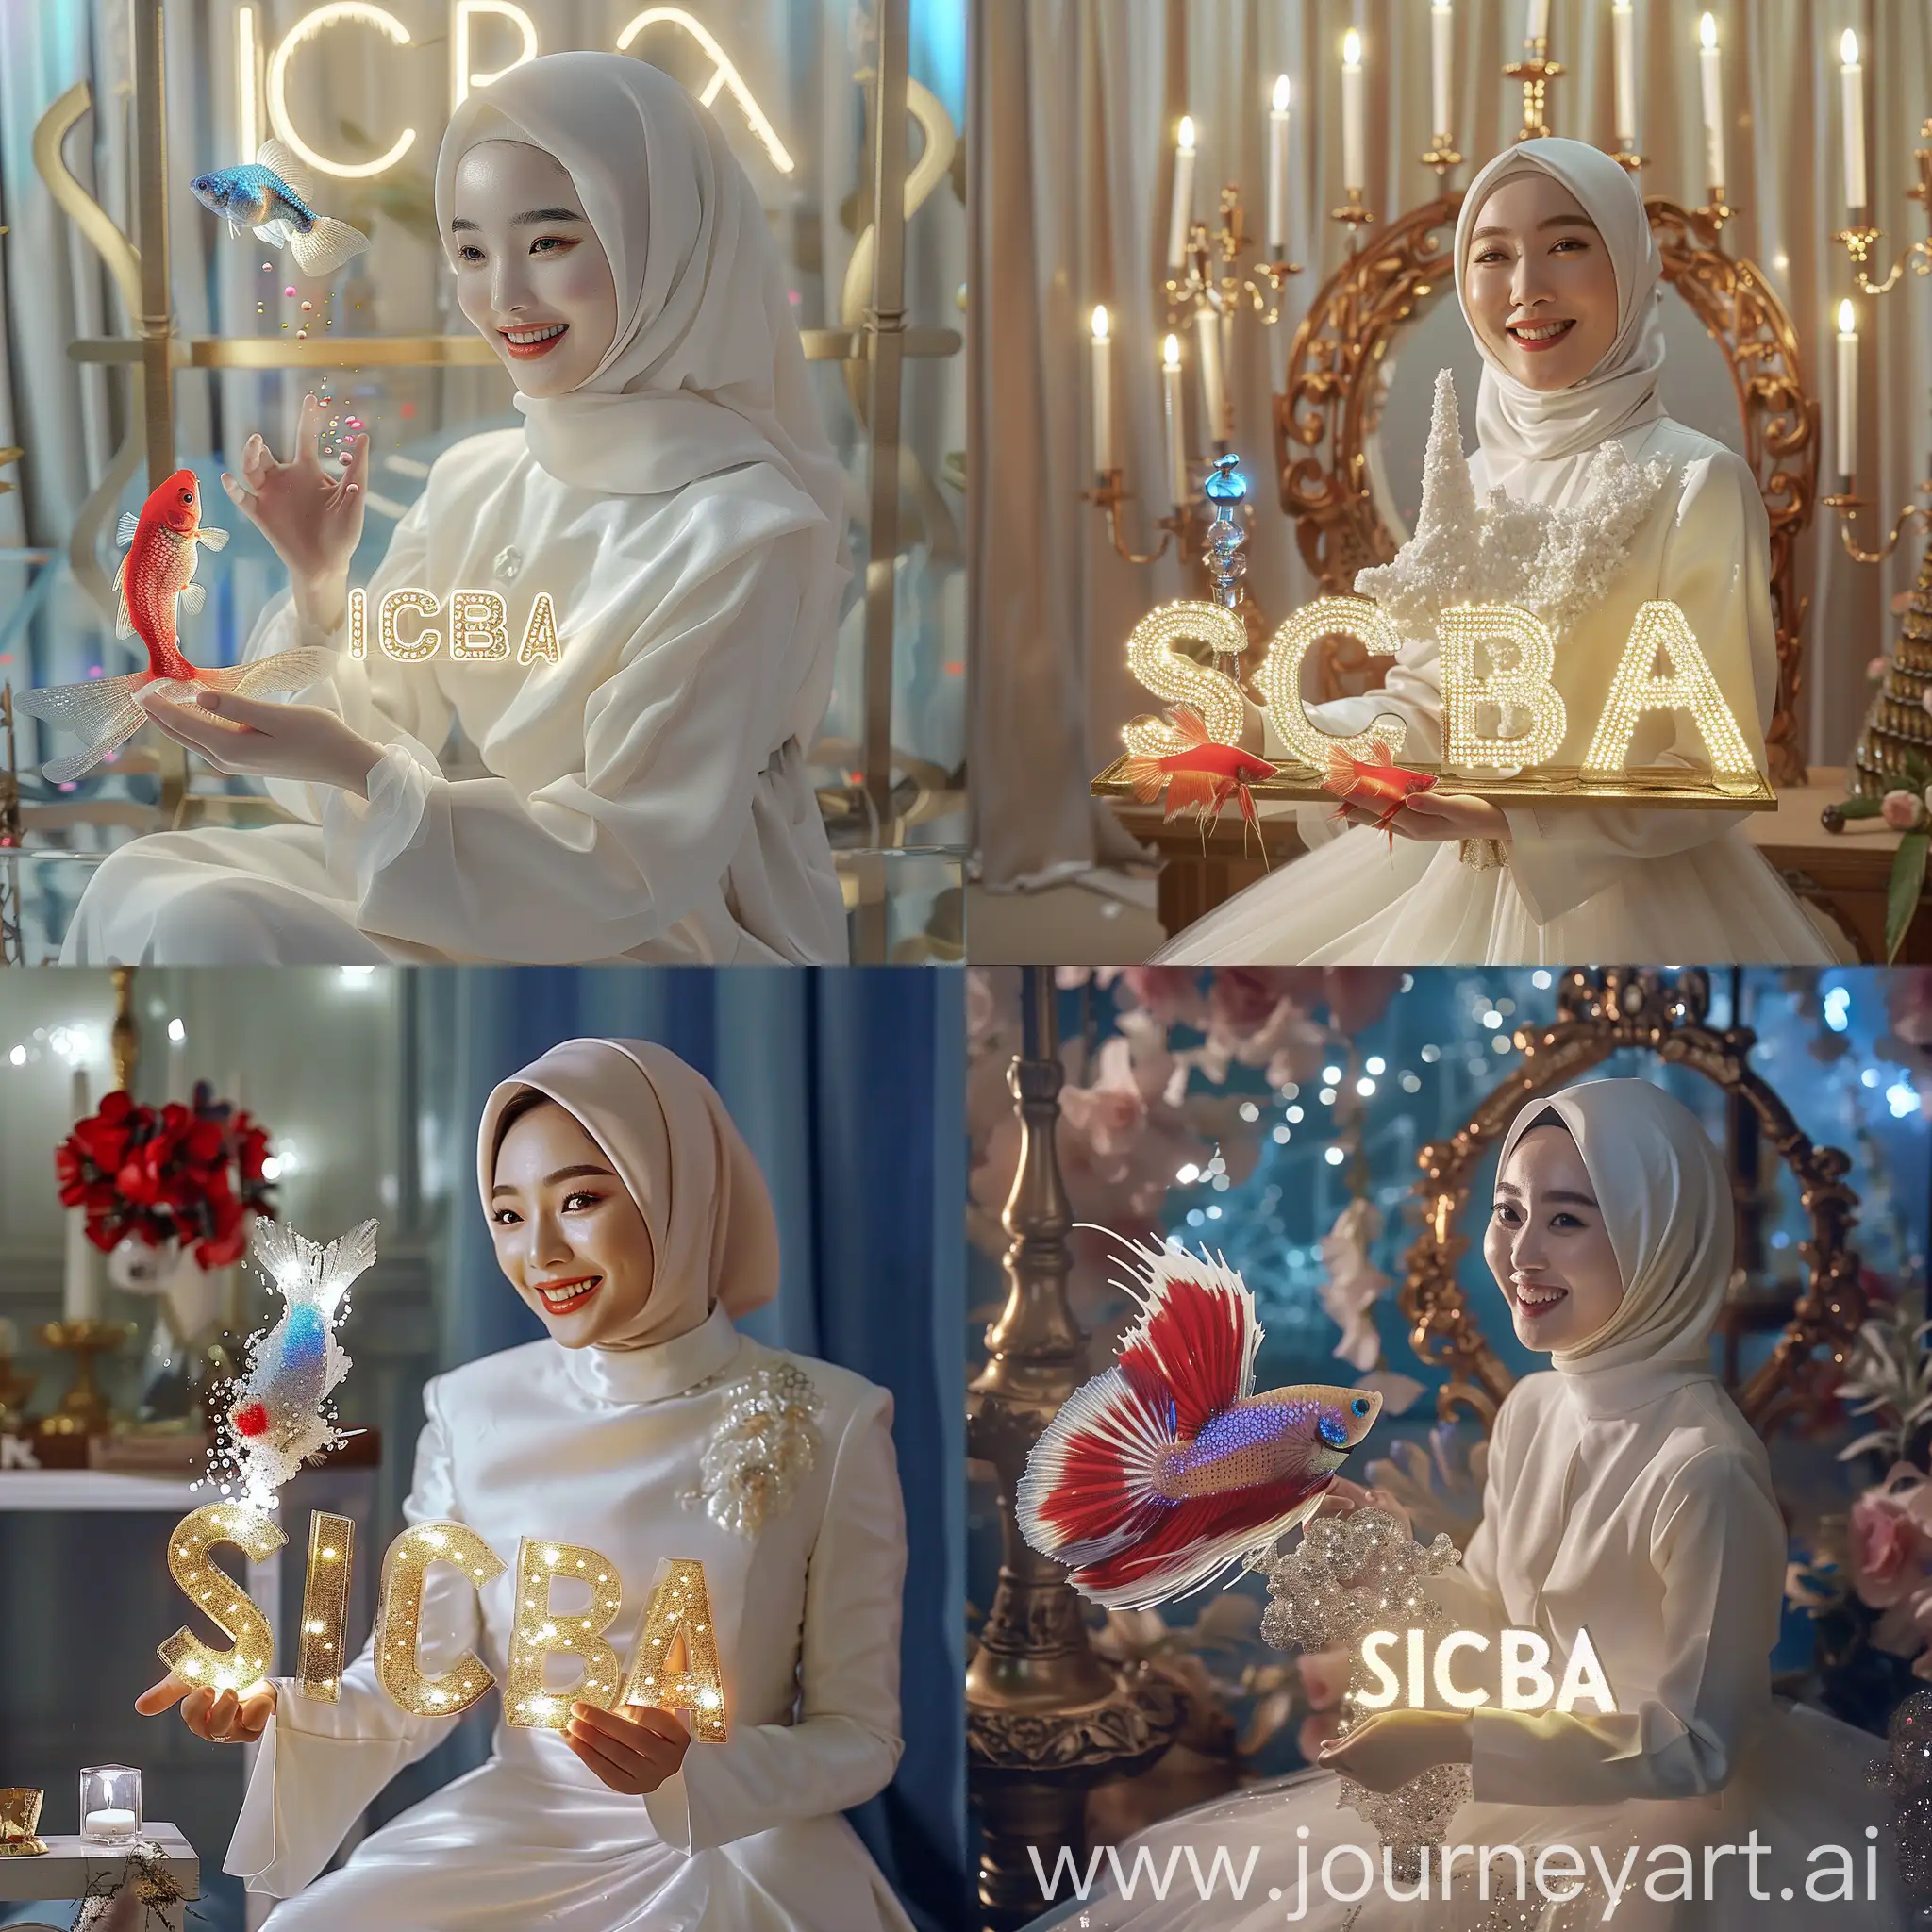 super ultra hyper extreme amazing detailed and realistic crystal text name that says very detailed "SICBA" lights up with white bias gold crome water that says "SICBA", extreme fractal, mirroring effect photography very clouse up korean beautiful hijab woman smile white dress sitting a altar holding a miniature red blue white betafish with long tailed. 4k UHD